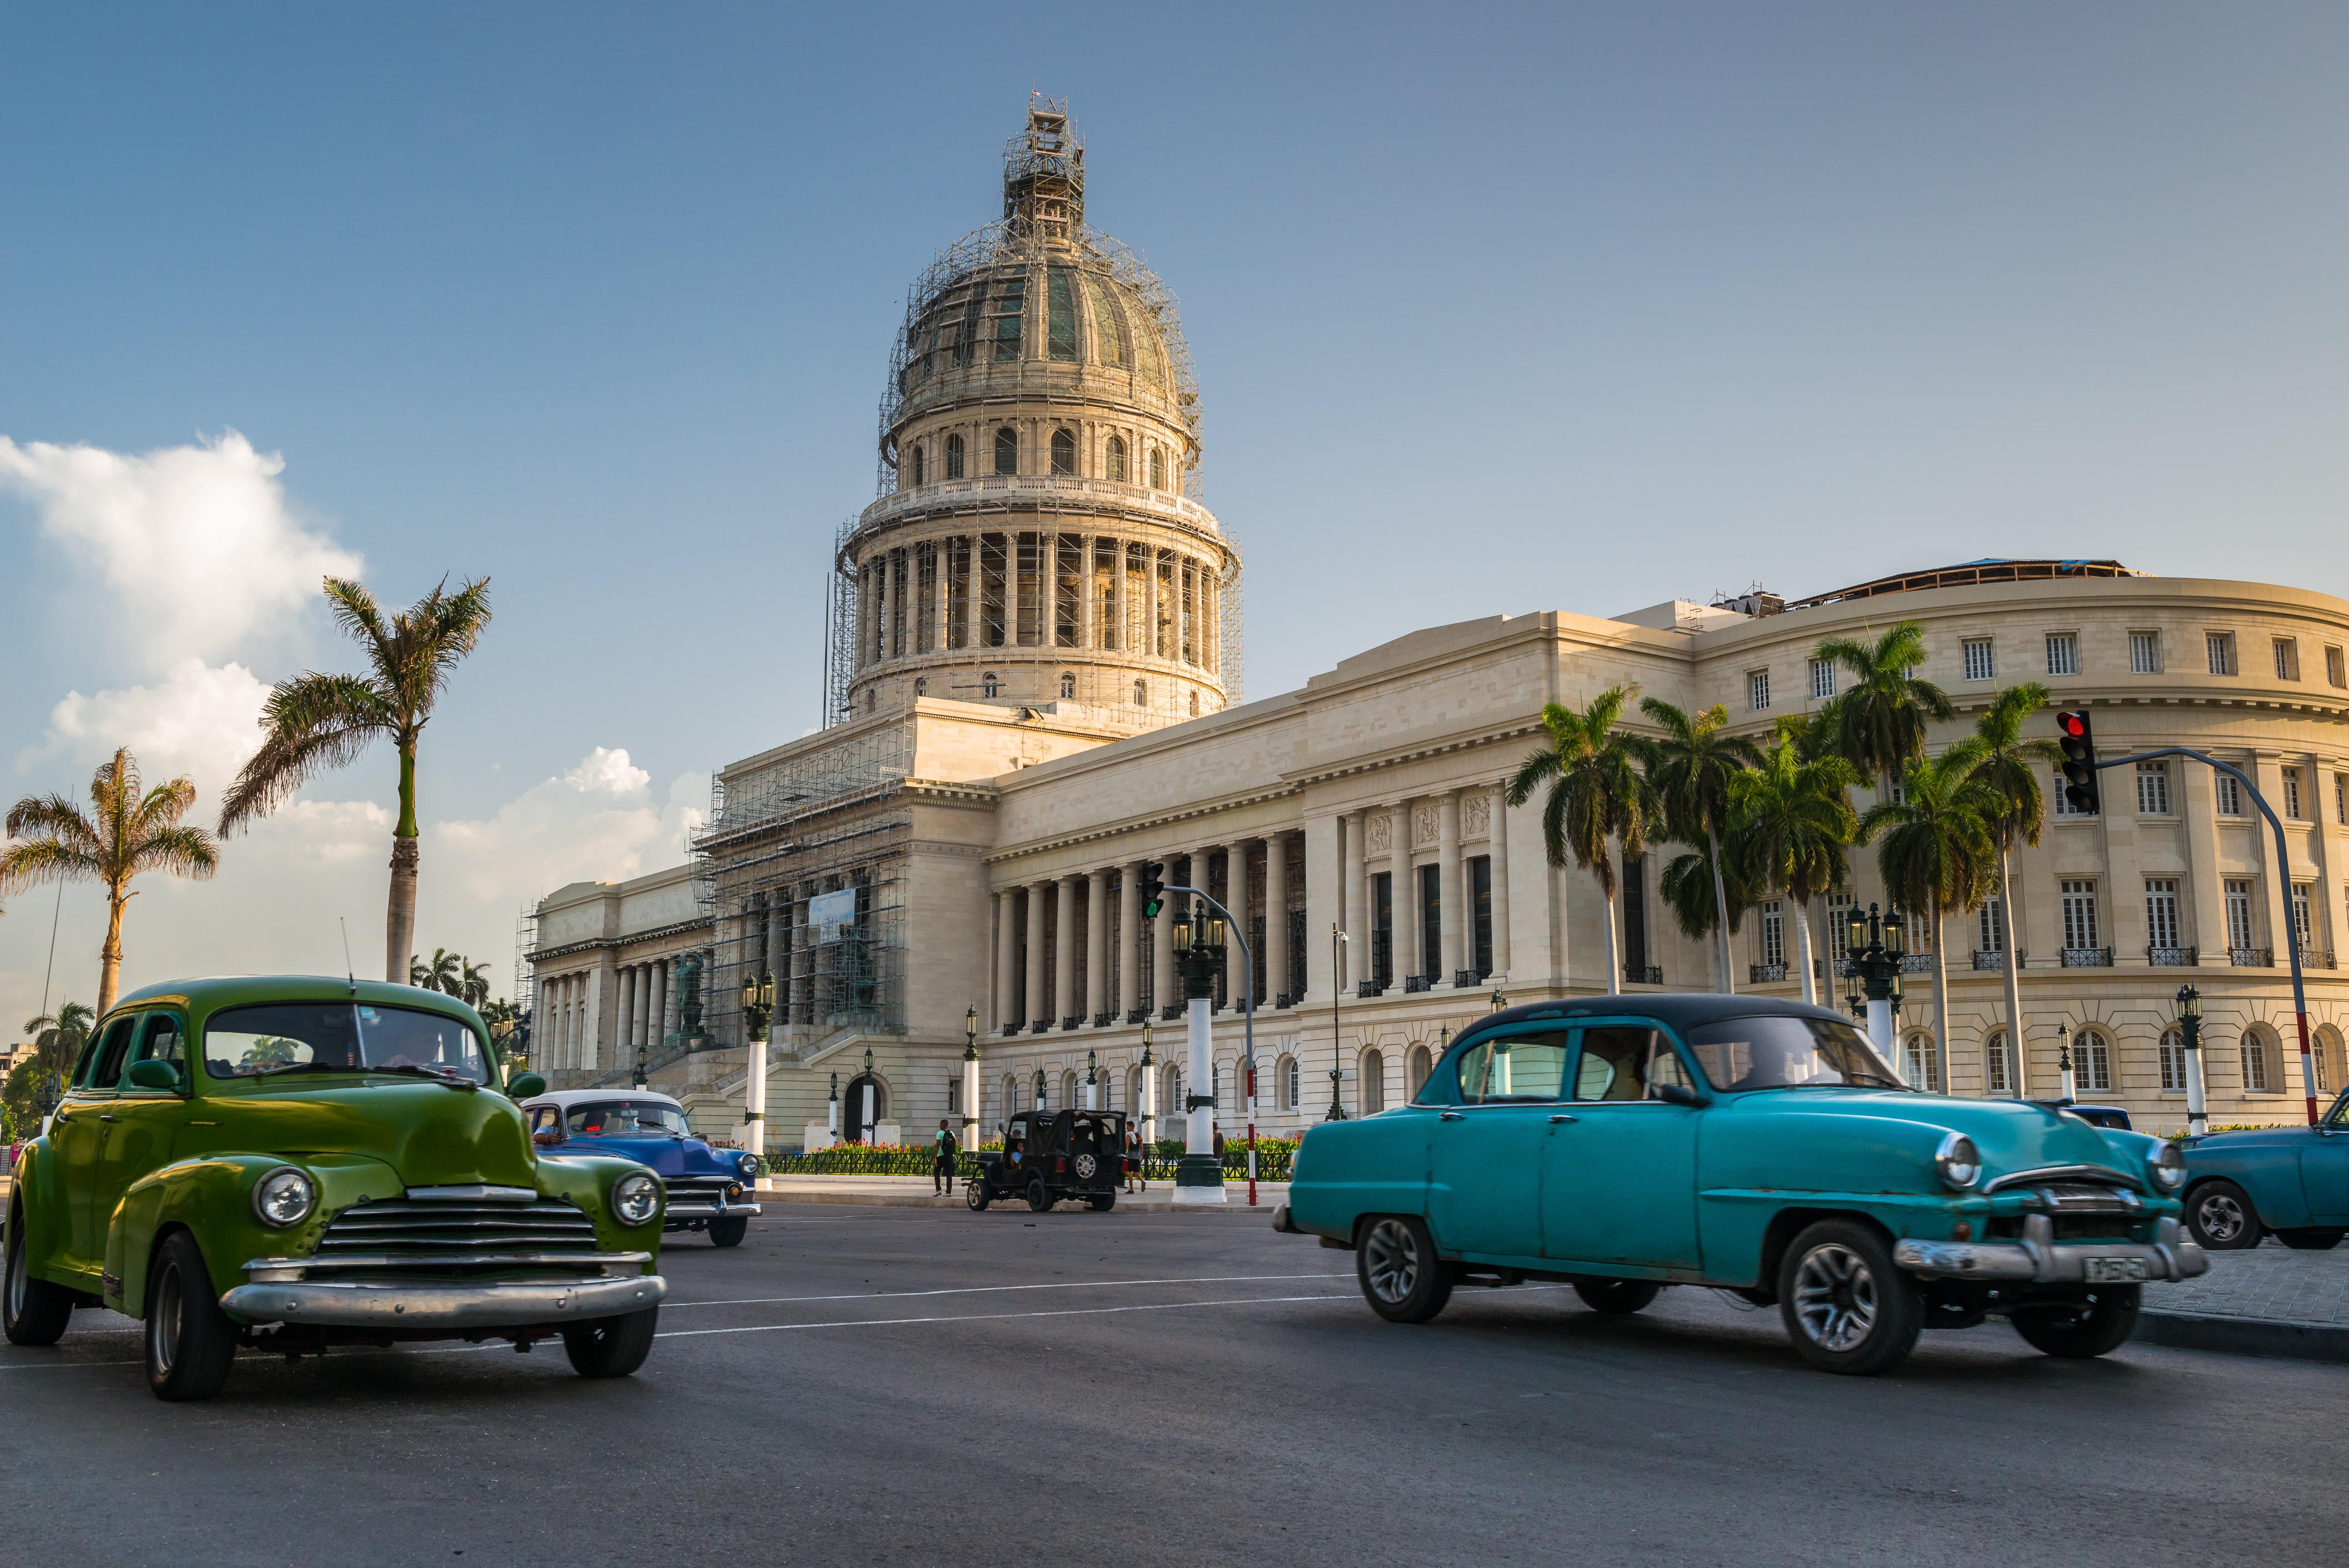 Old American cars drive past the Capitol building in Havana, Cuba